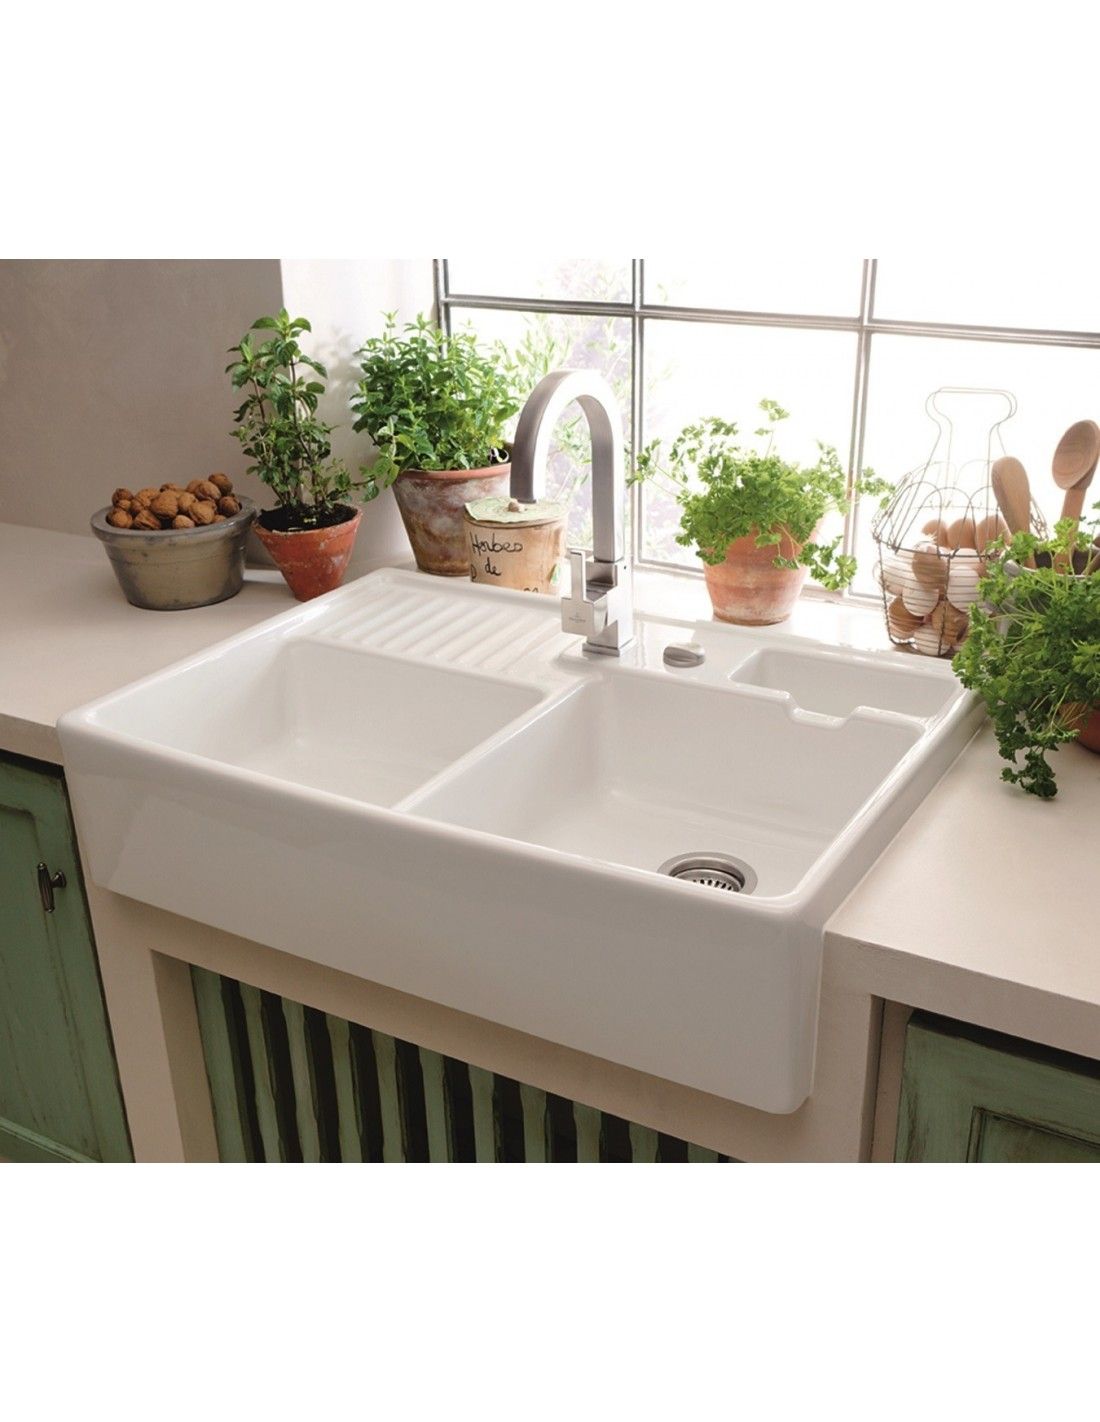 The Importance of Choosing the Right Kitchen Sink: A Guide for Homeowners